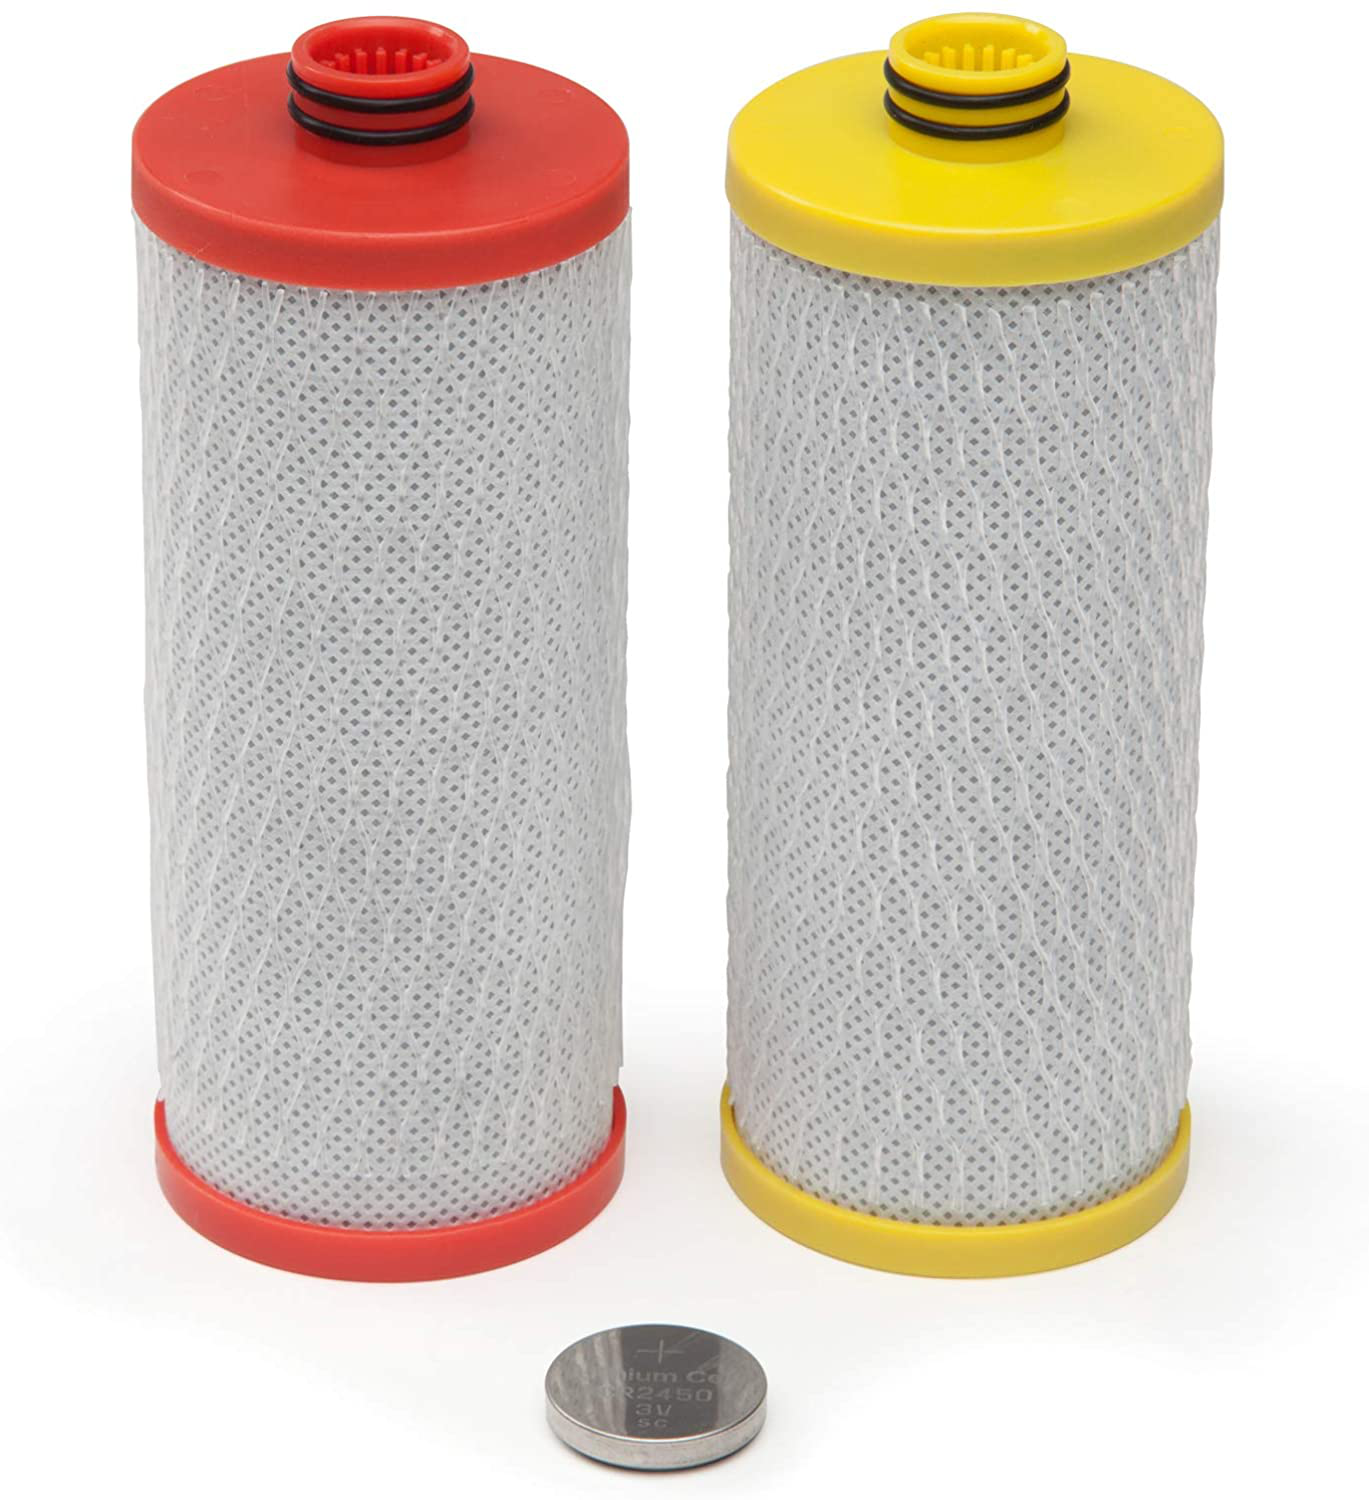 Aquasana AQ-5200R AQ 2-Stage Under Counter Replacement Filter Cartridges, 2, Red and Yellow, 2 Count